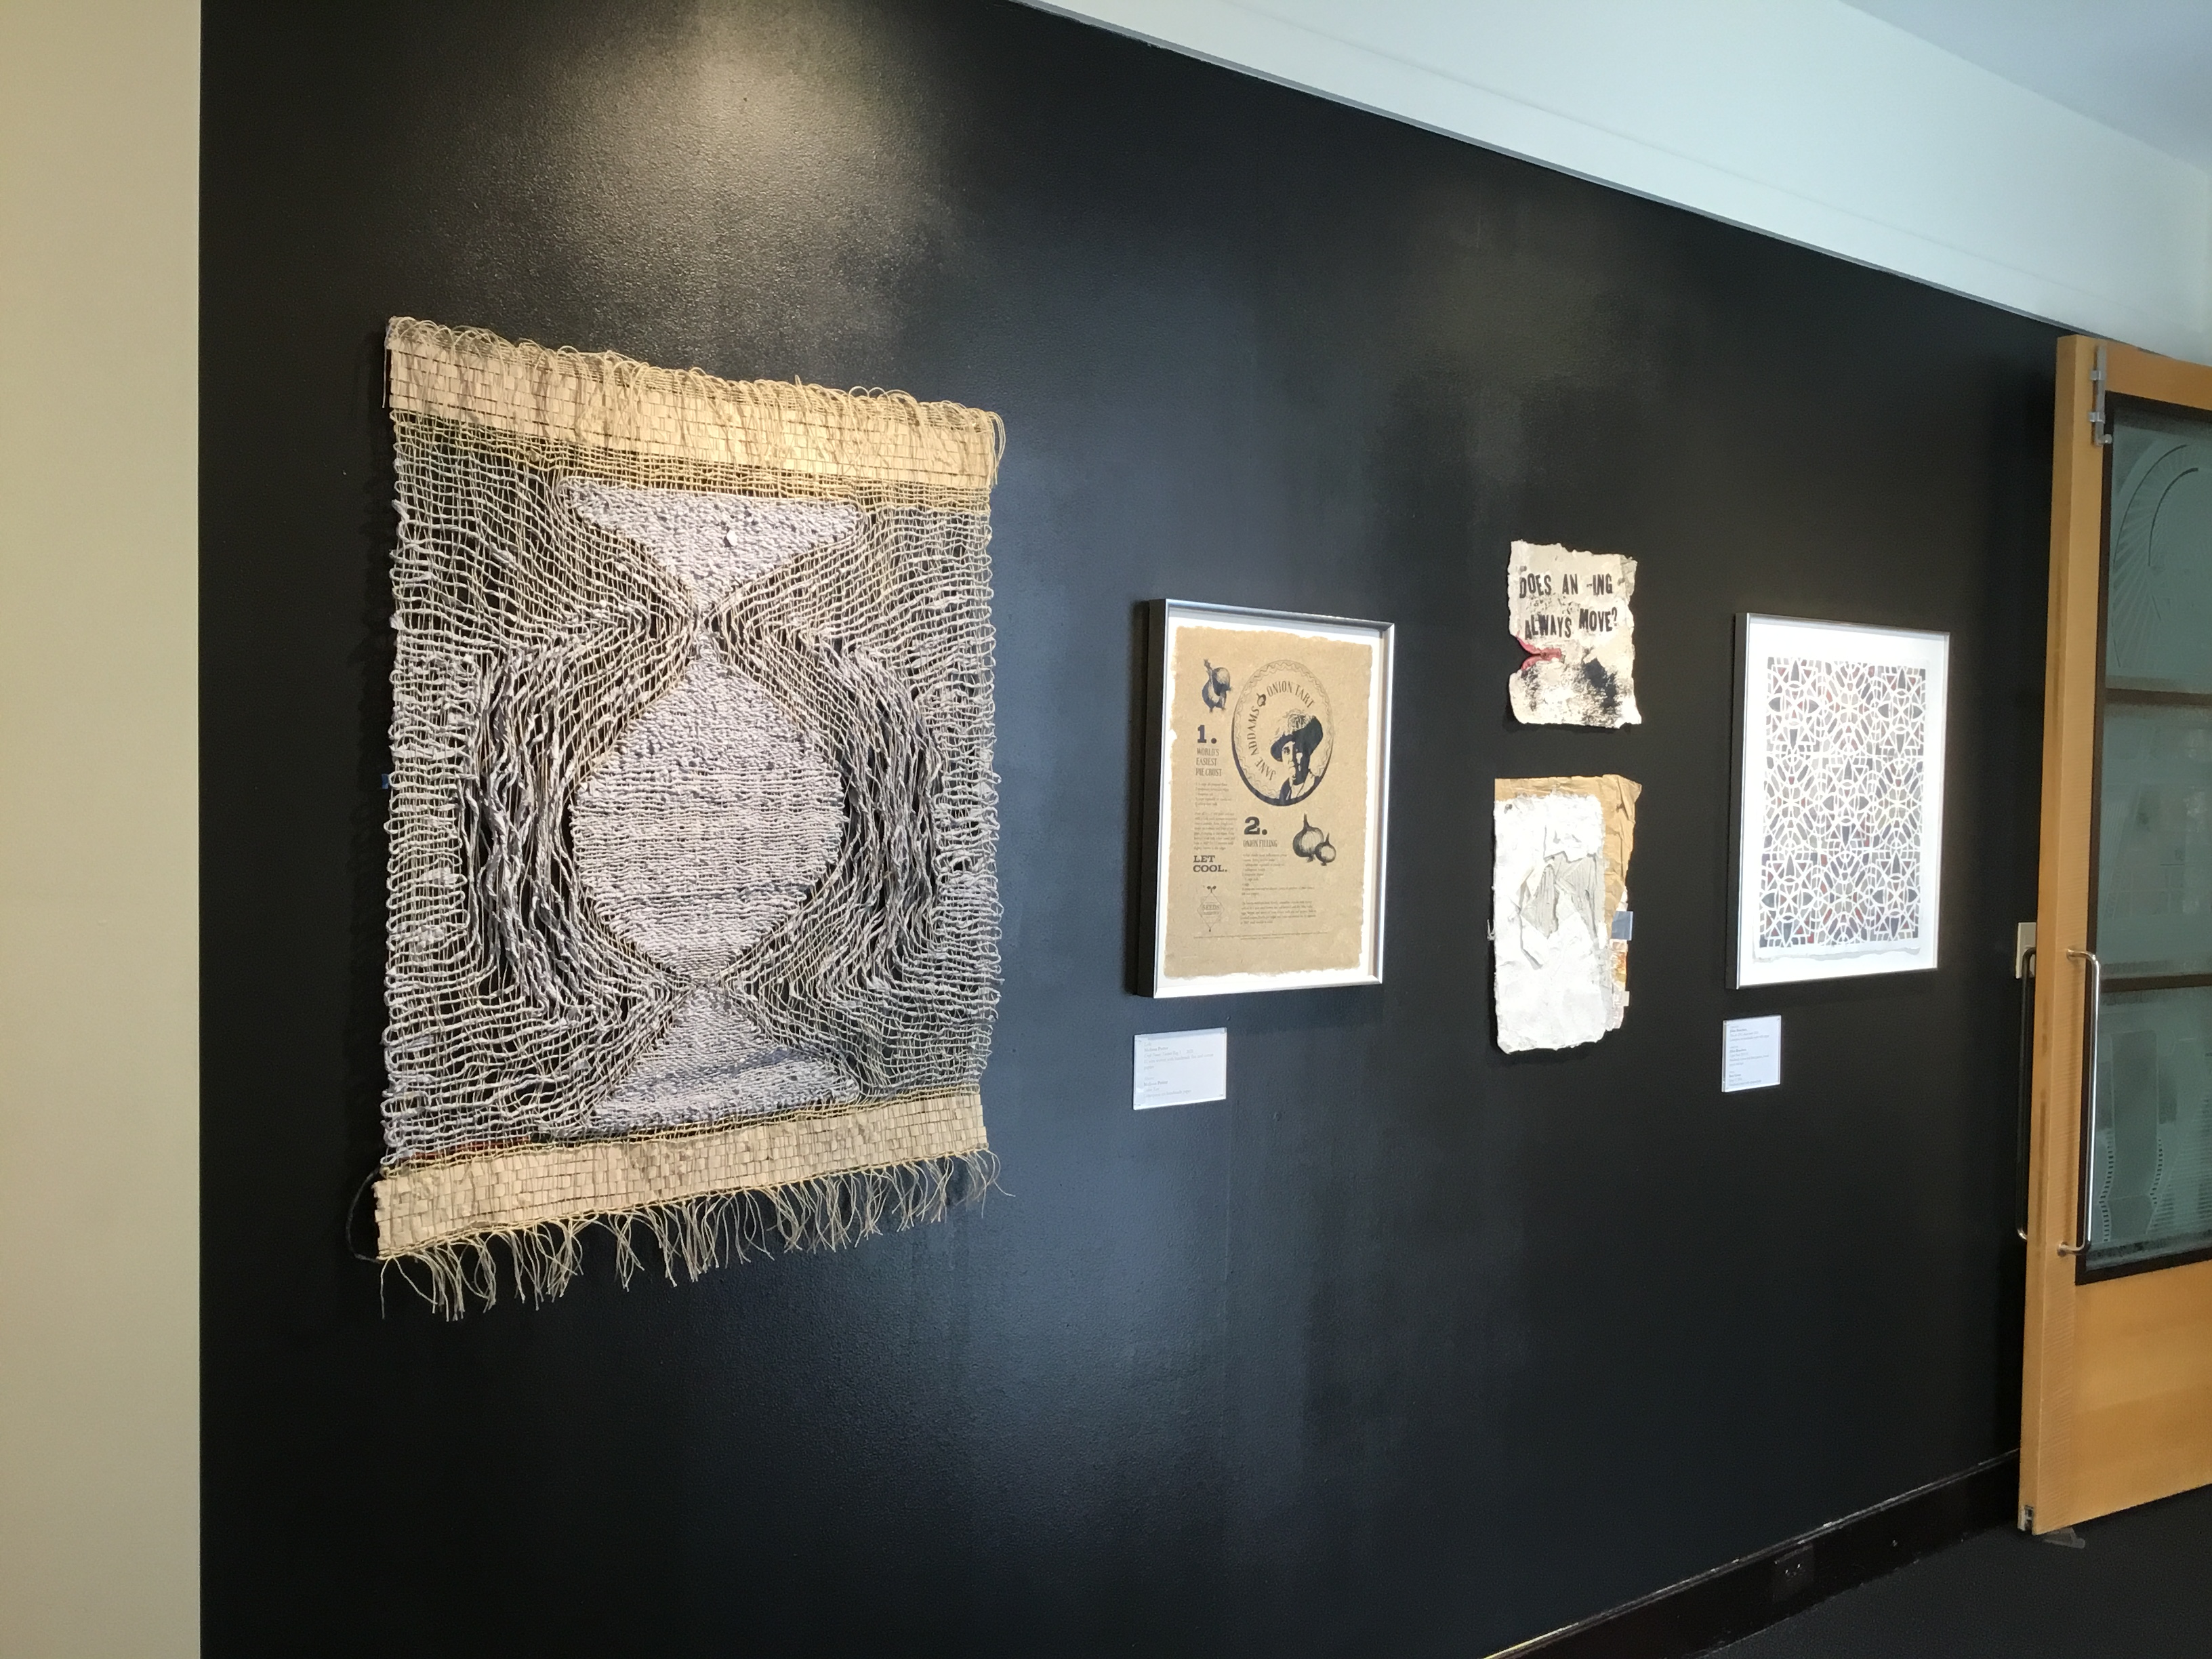 Five artworks on a black wall at the entry into the gallery. First image looks like a woven rug, the second image is a small brown sheet of paper with a portrait printed on it and next to that are abstract pieces made from recycled paper. The last image is a mosaic geometric design.